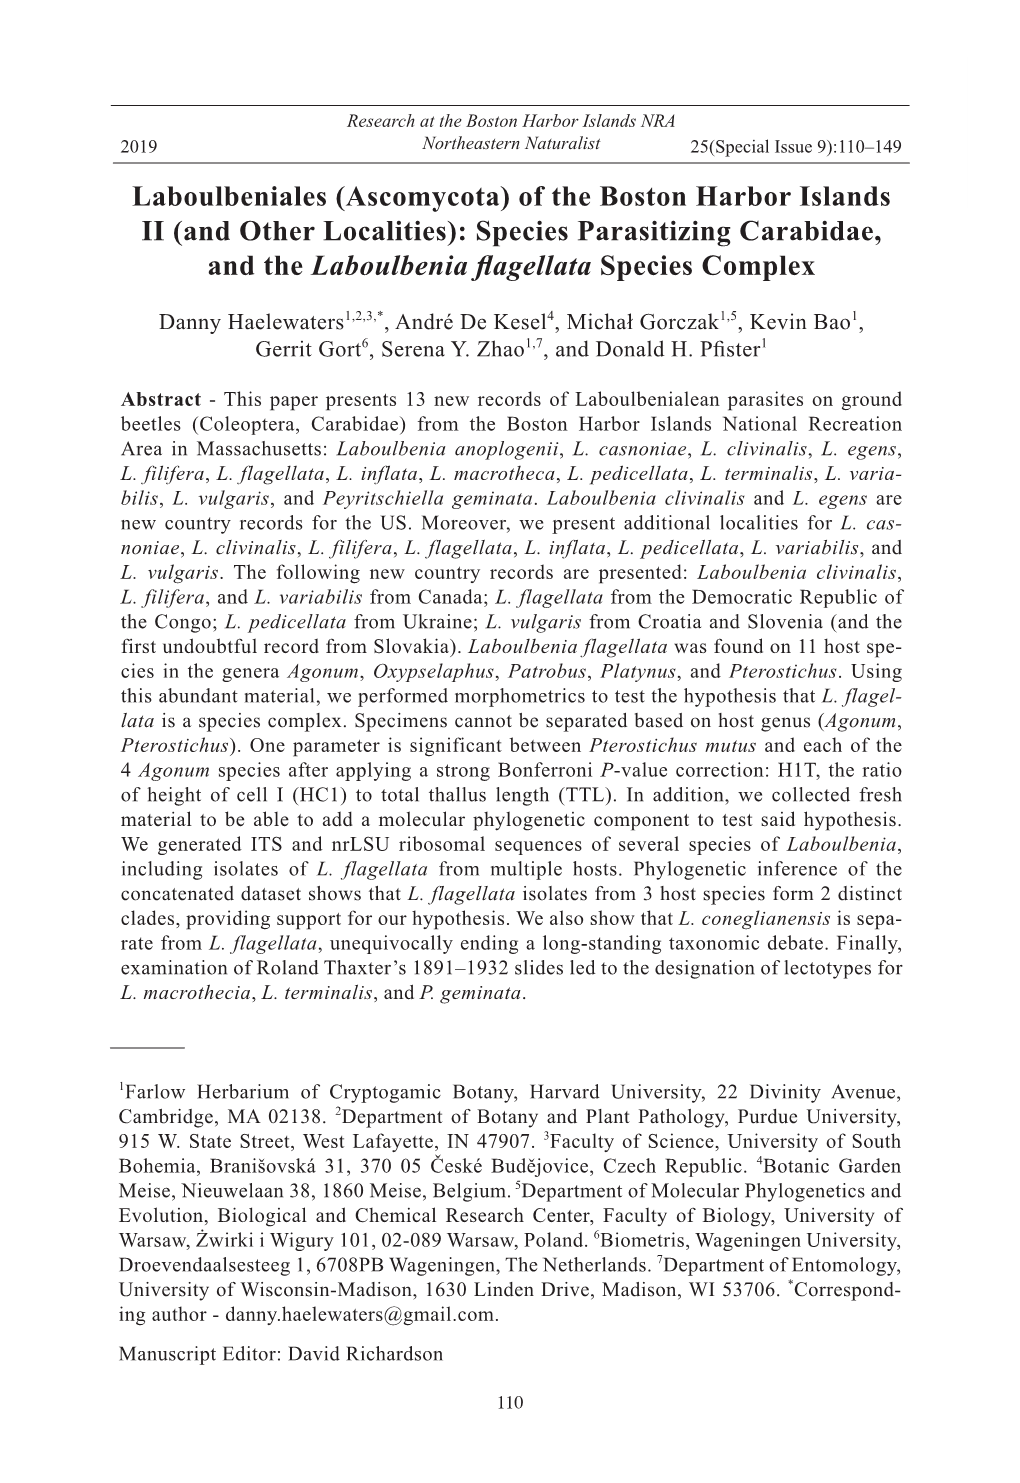 Laboulbeniales (Ascomycota) of the Boston Harbor Islands II (And Other Localities): Species Parasitizing Carabidae, and the Laboulbenia Flagellata Species Complex